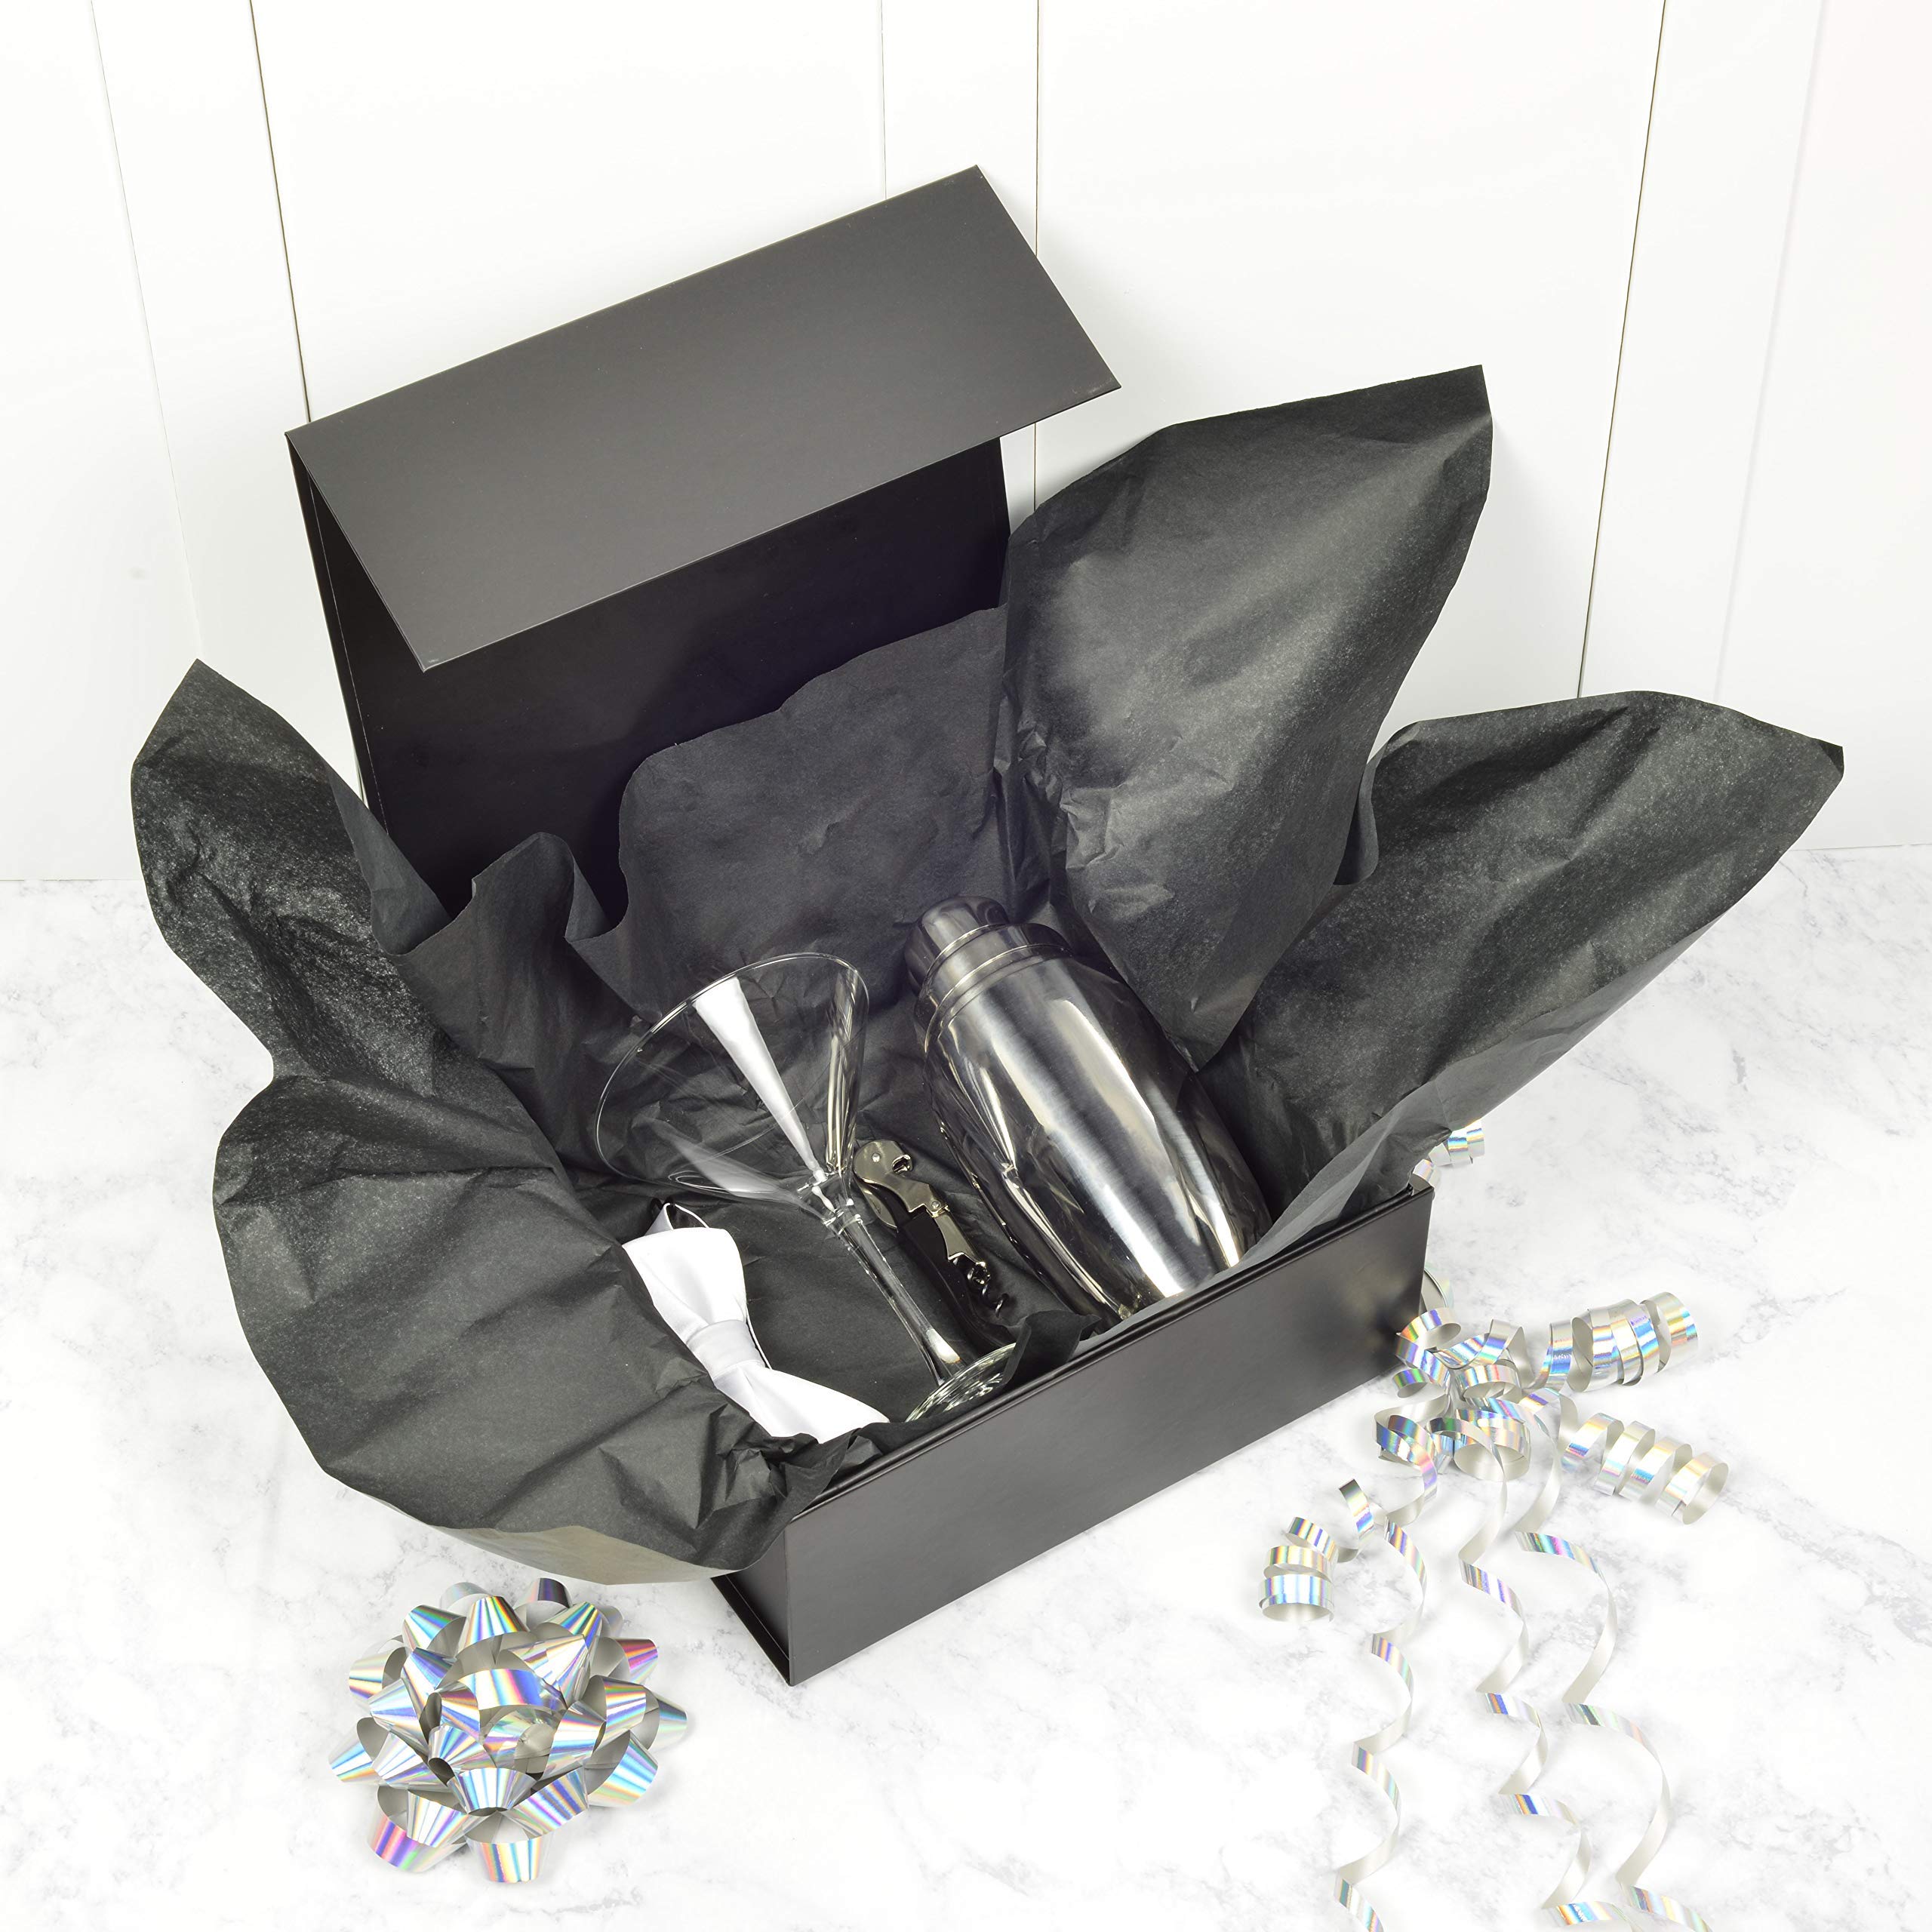 OccasionALL 9.4x9.4x3.7 1 Piece Black Box with Lid, Magnetic Gift Box Large with Magnetic Closure for Small Business, Wedding, Bridesmaids, Holidays  - Like New